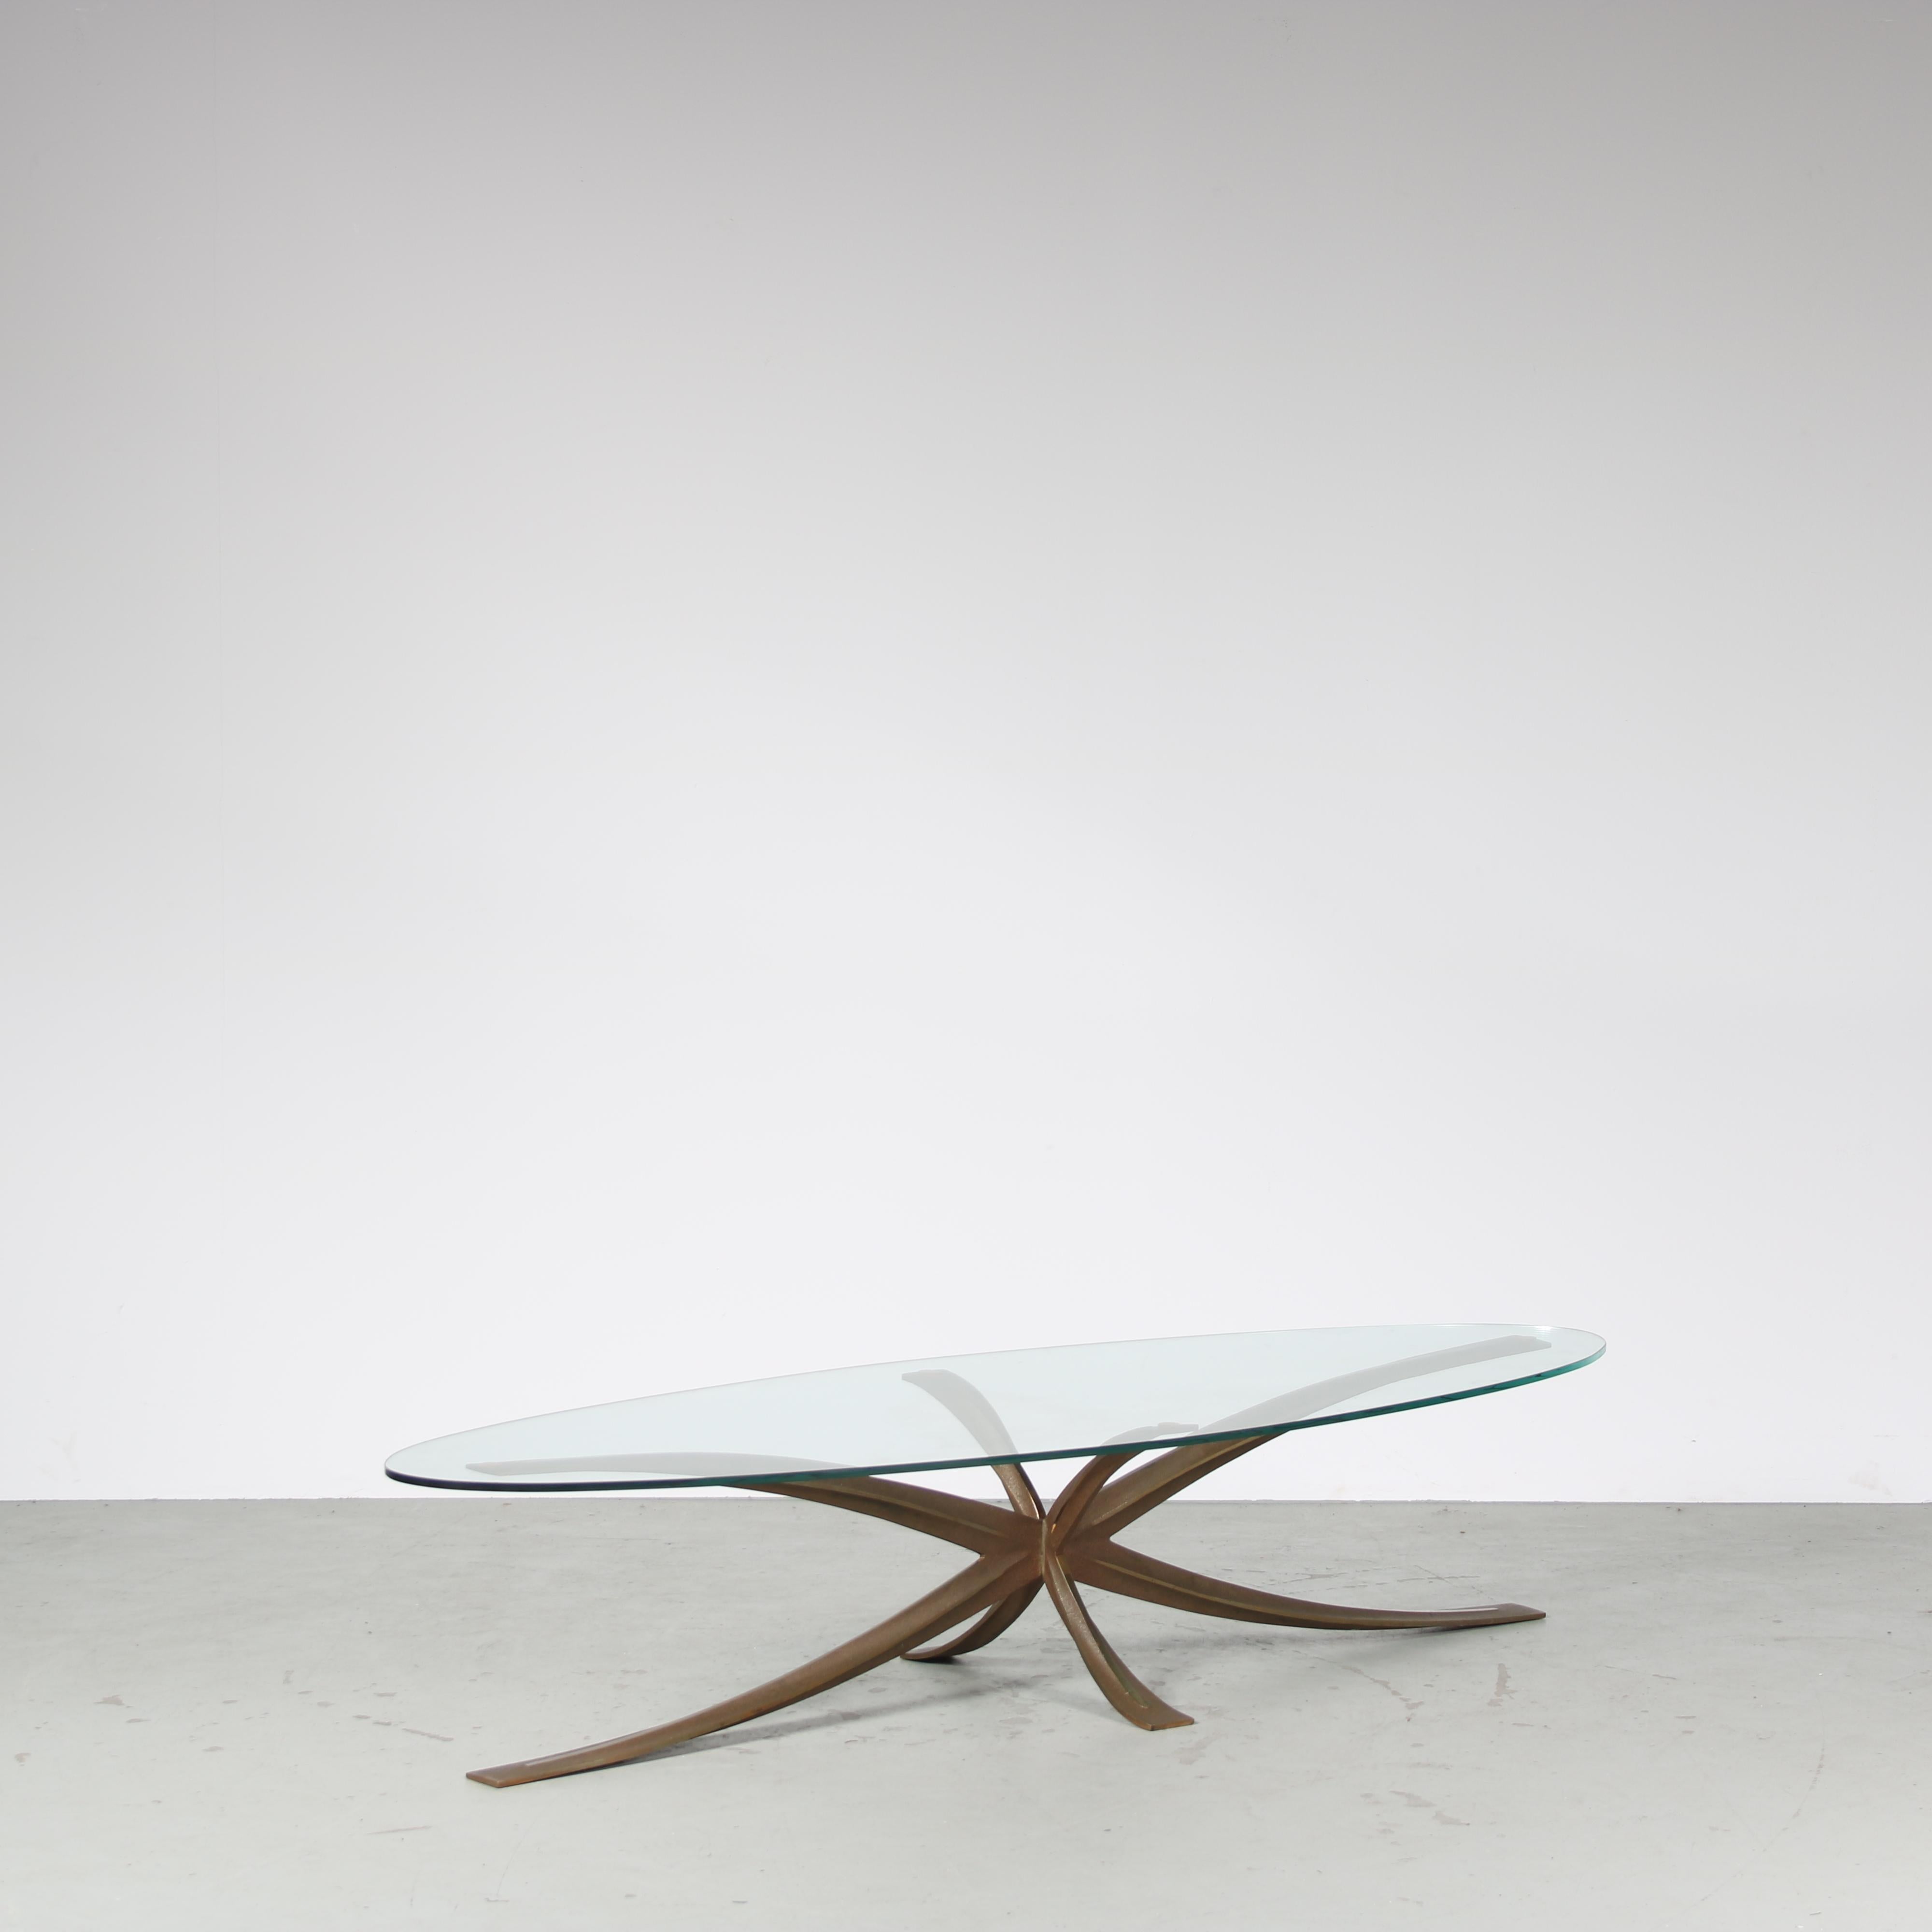 An exceptional and very rare coffee table designed by Michel Mangematin & Roger Bruny and made in France around 1960.

Crafted with precision and artistry, the table has an elegant oval clear glass top on a high quality sculptural solid brass base.